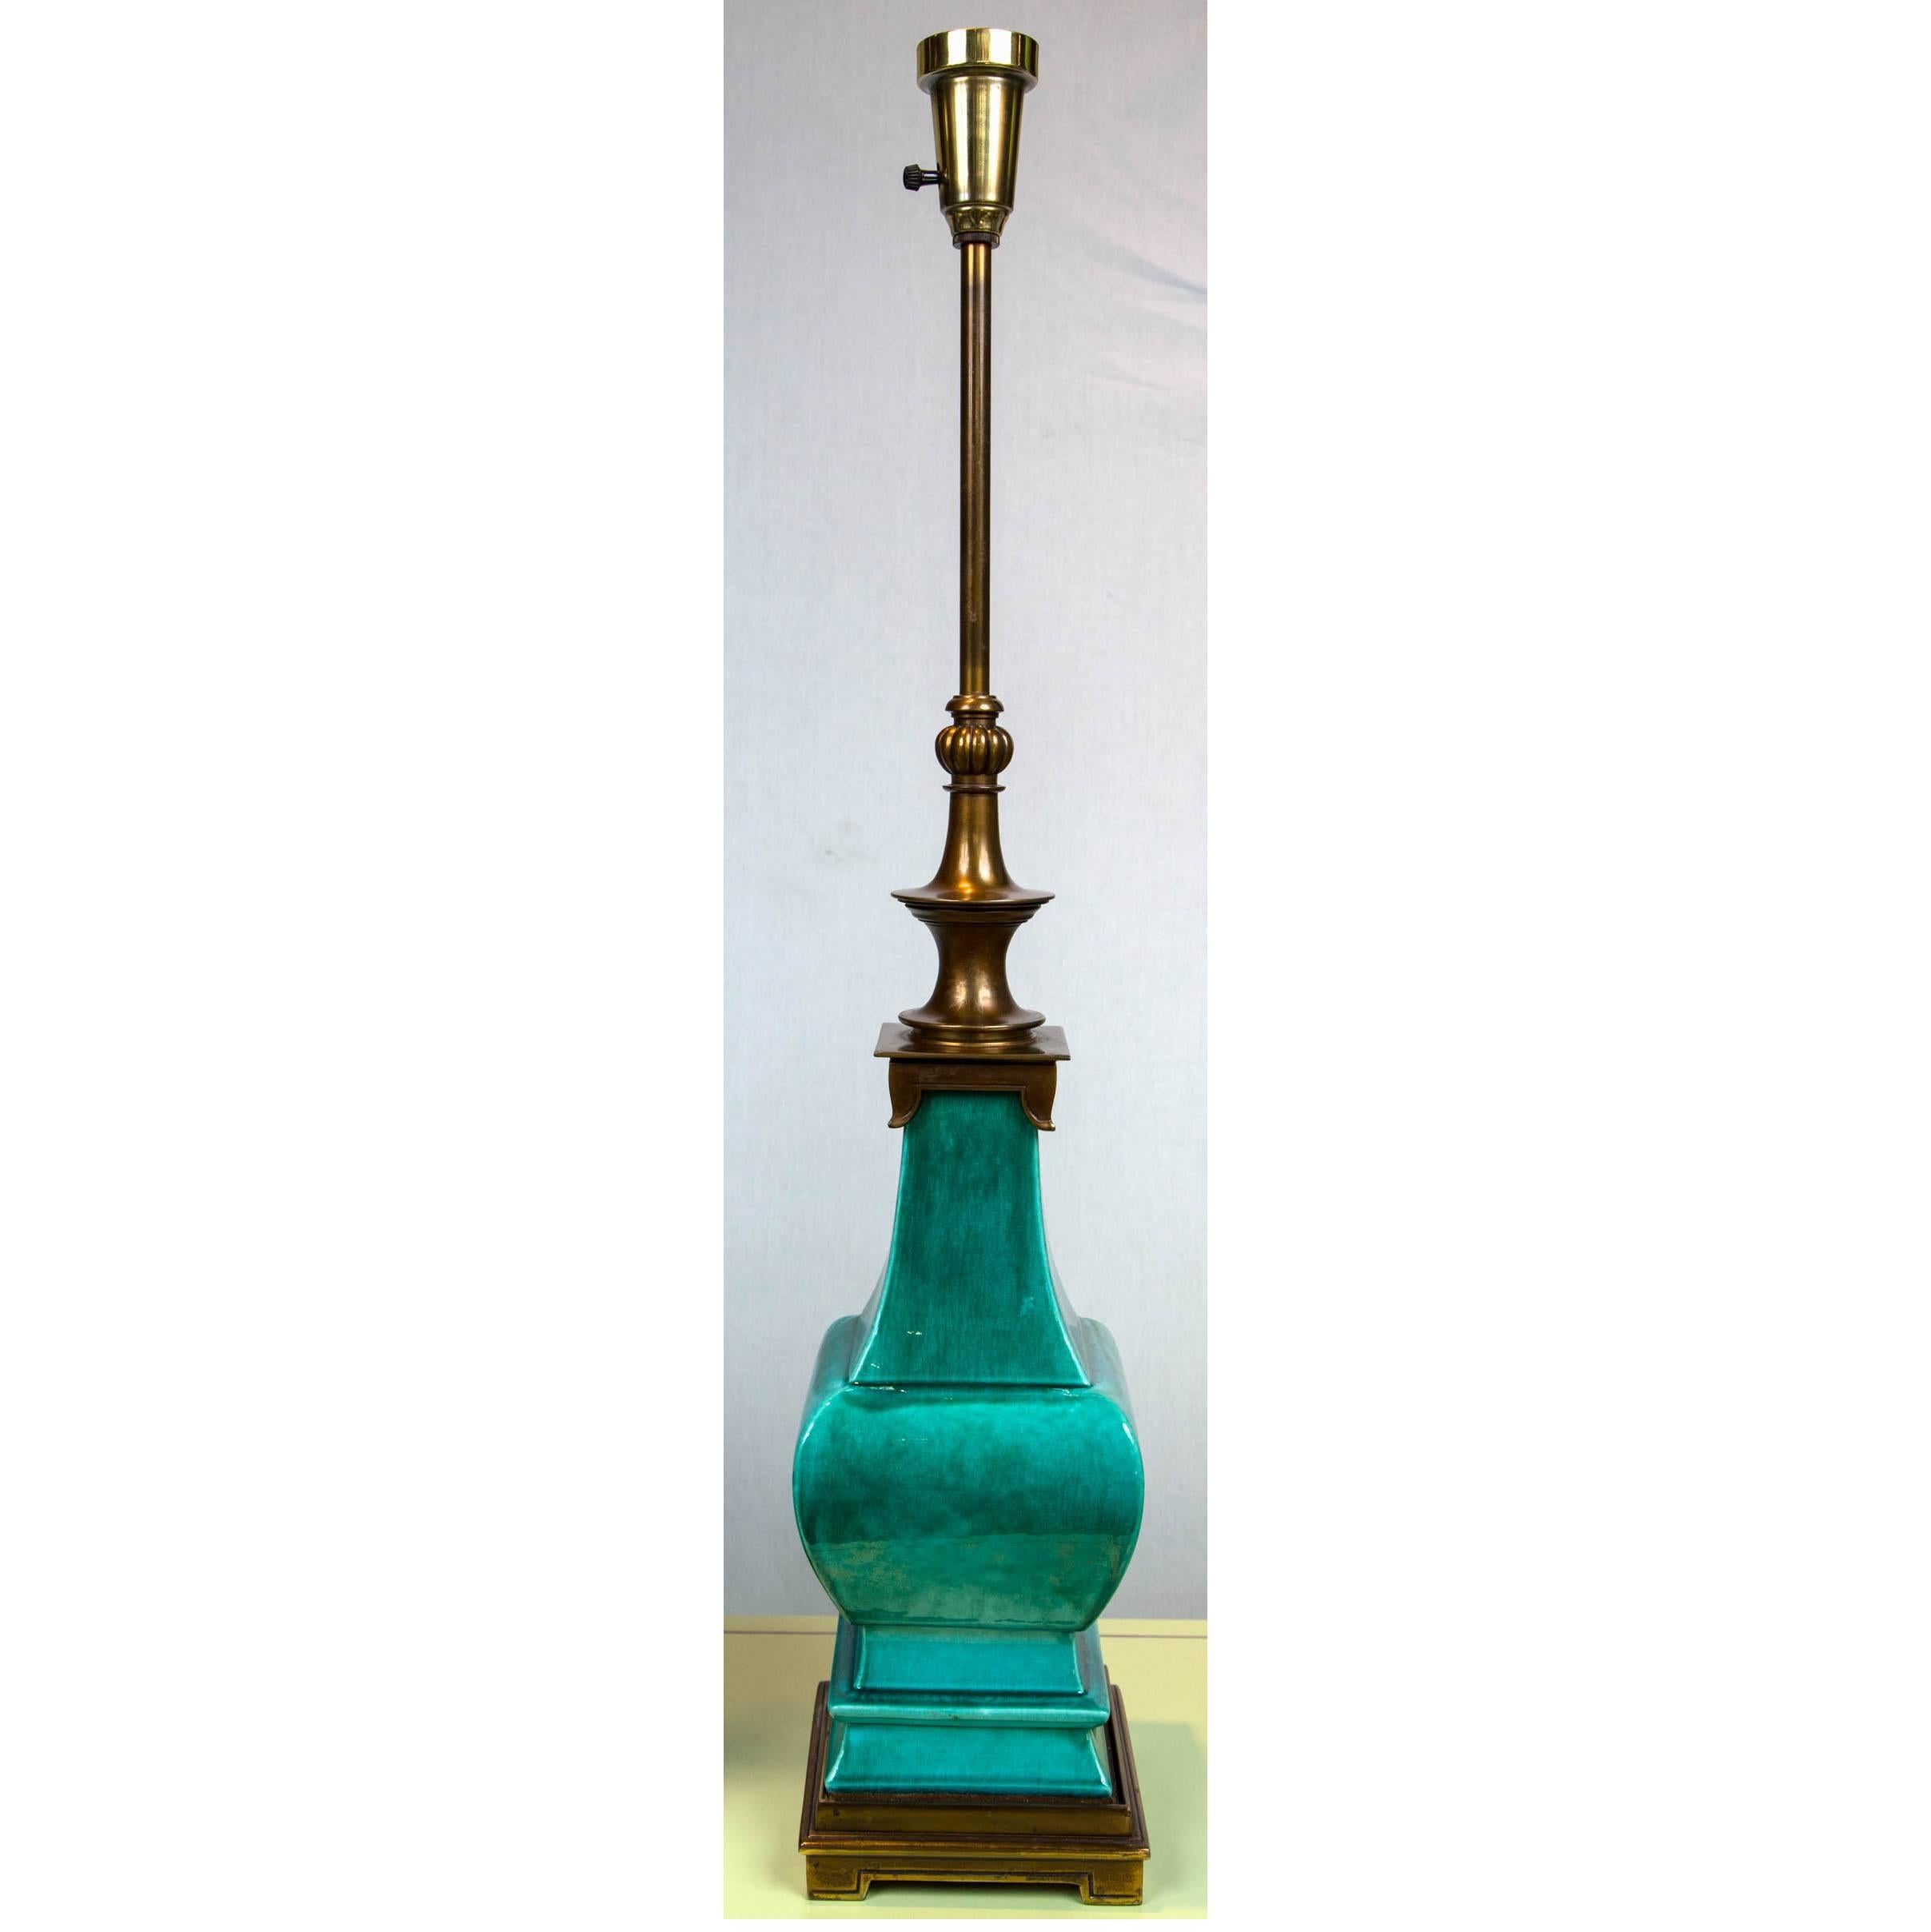 Lucious green glaze on the these vintage pagoda style Stiffel Lamps. Top of the line Lamp Company.